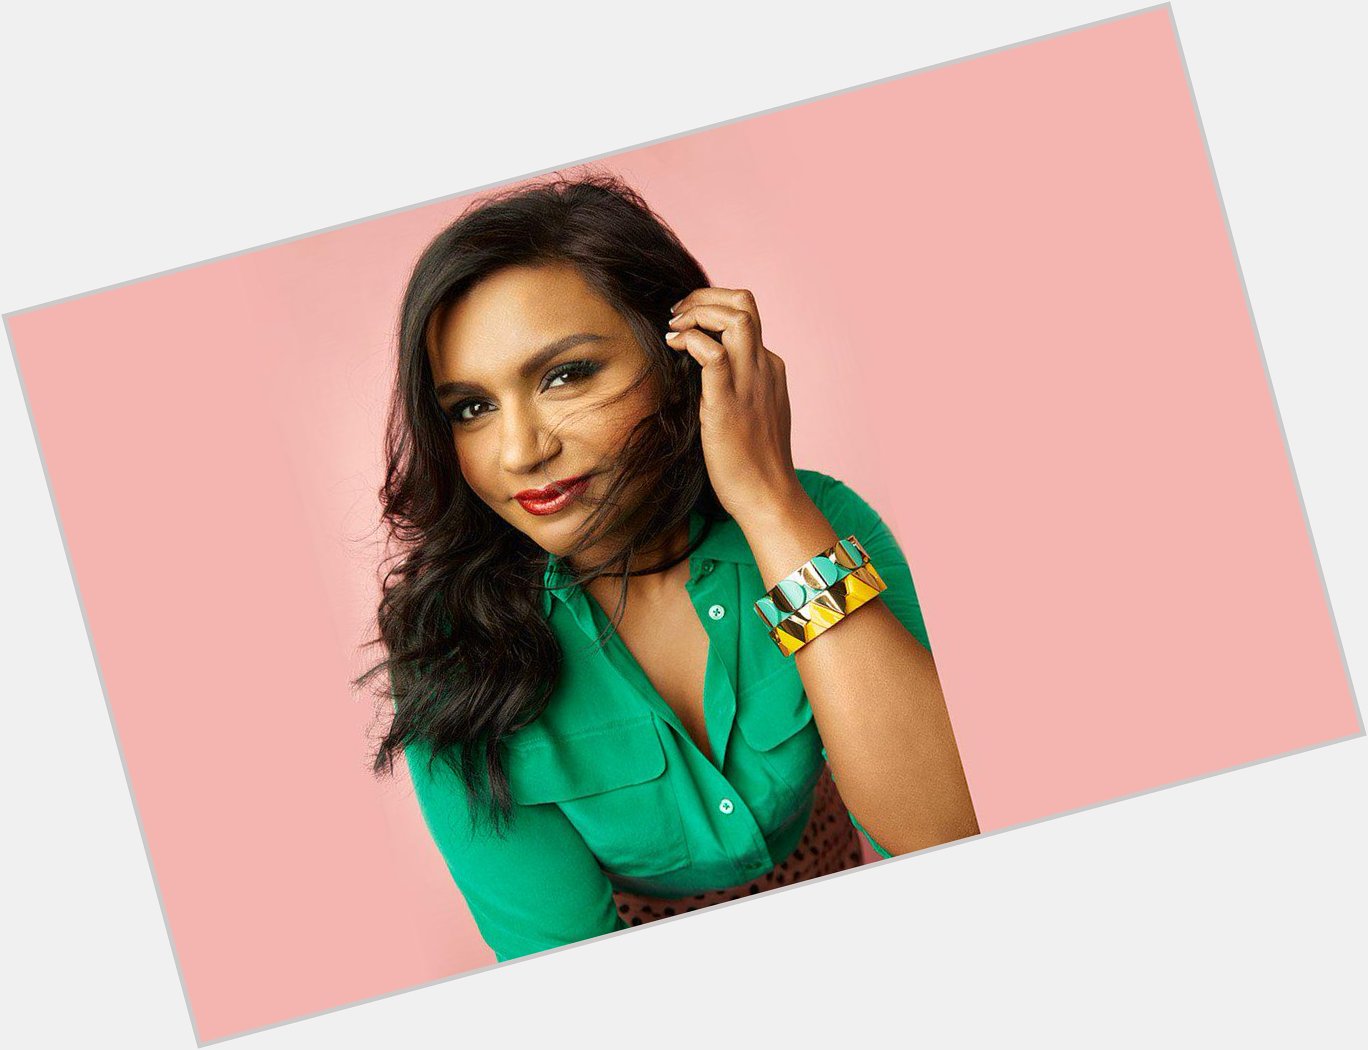 Happy 36th birthday today to actress Mindy Kaling.  